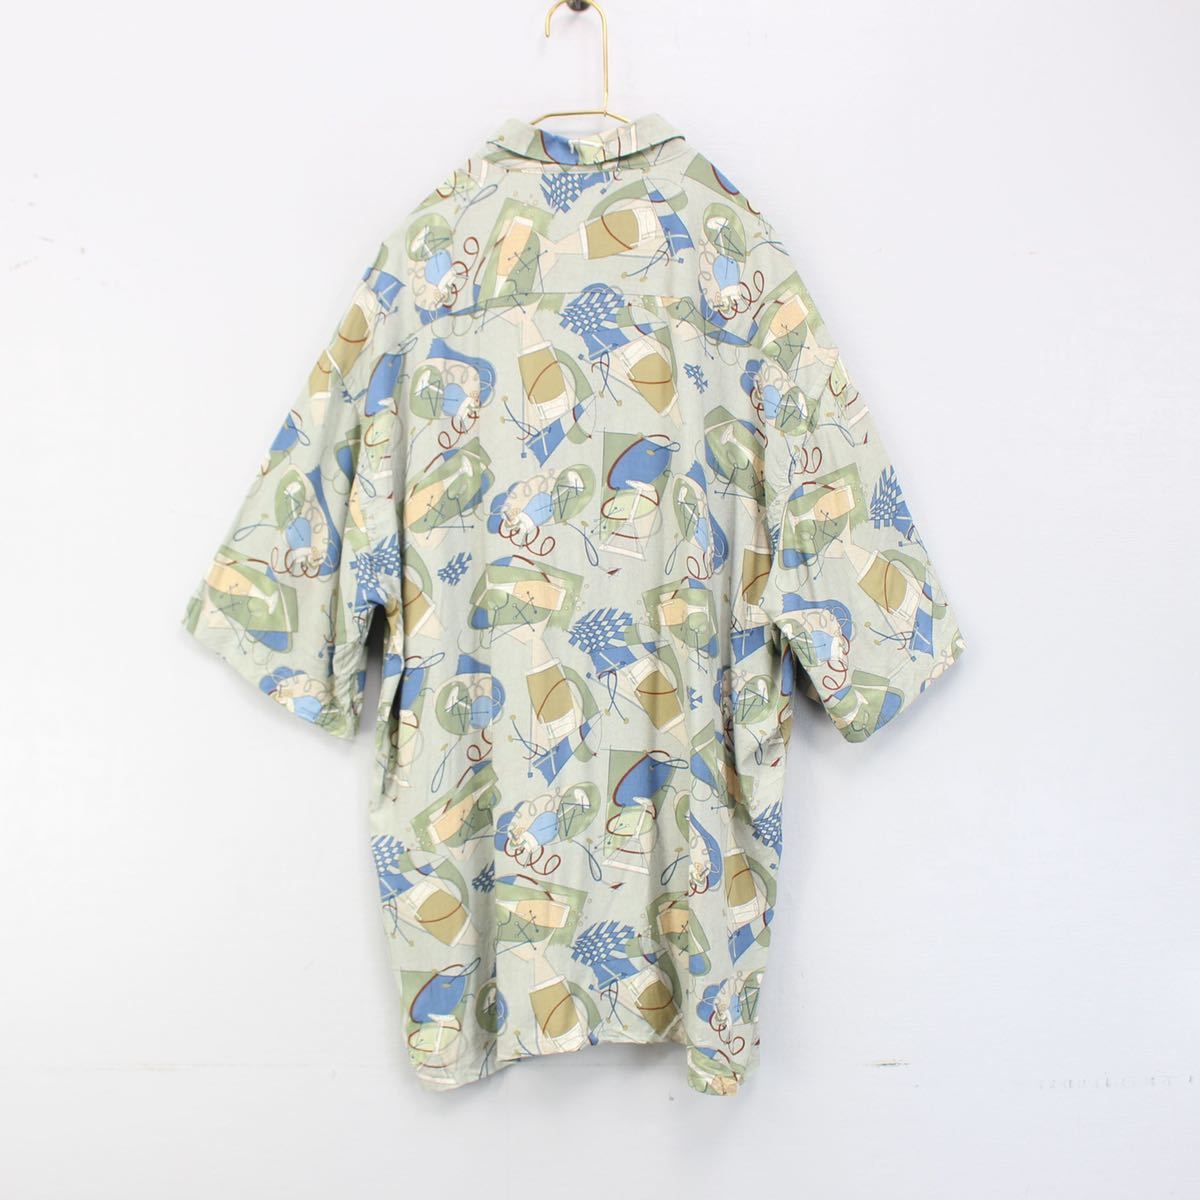 USA VINTAGE HALF SLEEVE COCKTAIL PATTERNED RAYON SHIRT/アメリカ古着半袖カクテル柄レーヨンシャツ_画像5